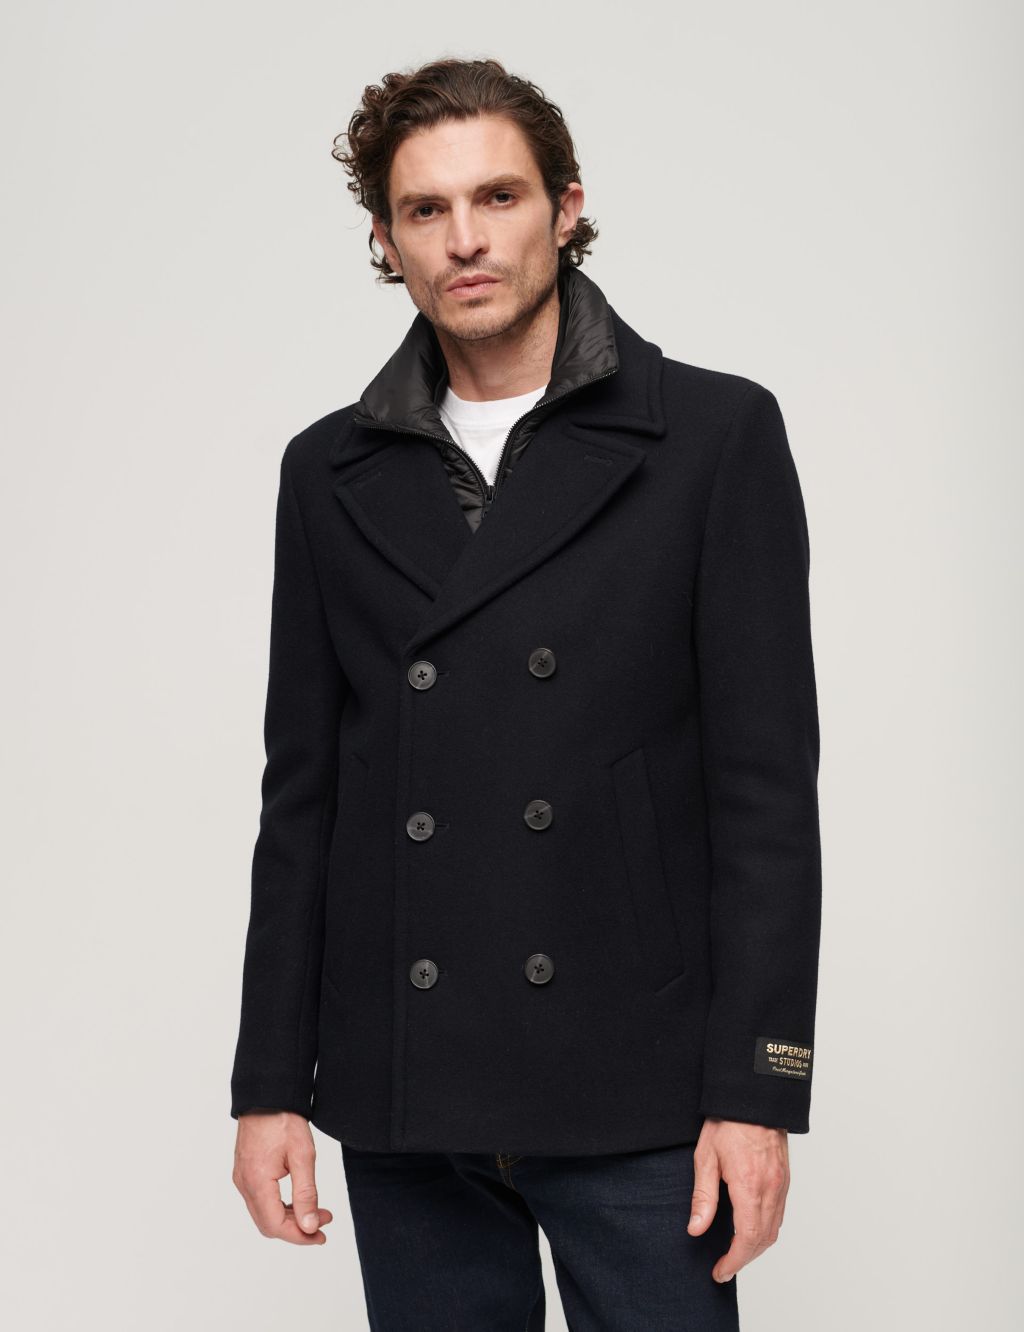 Buy Wool Rich Removable Gilet Peacoat | Superdry | M&S